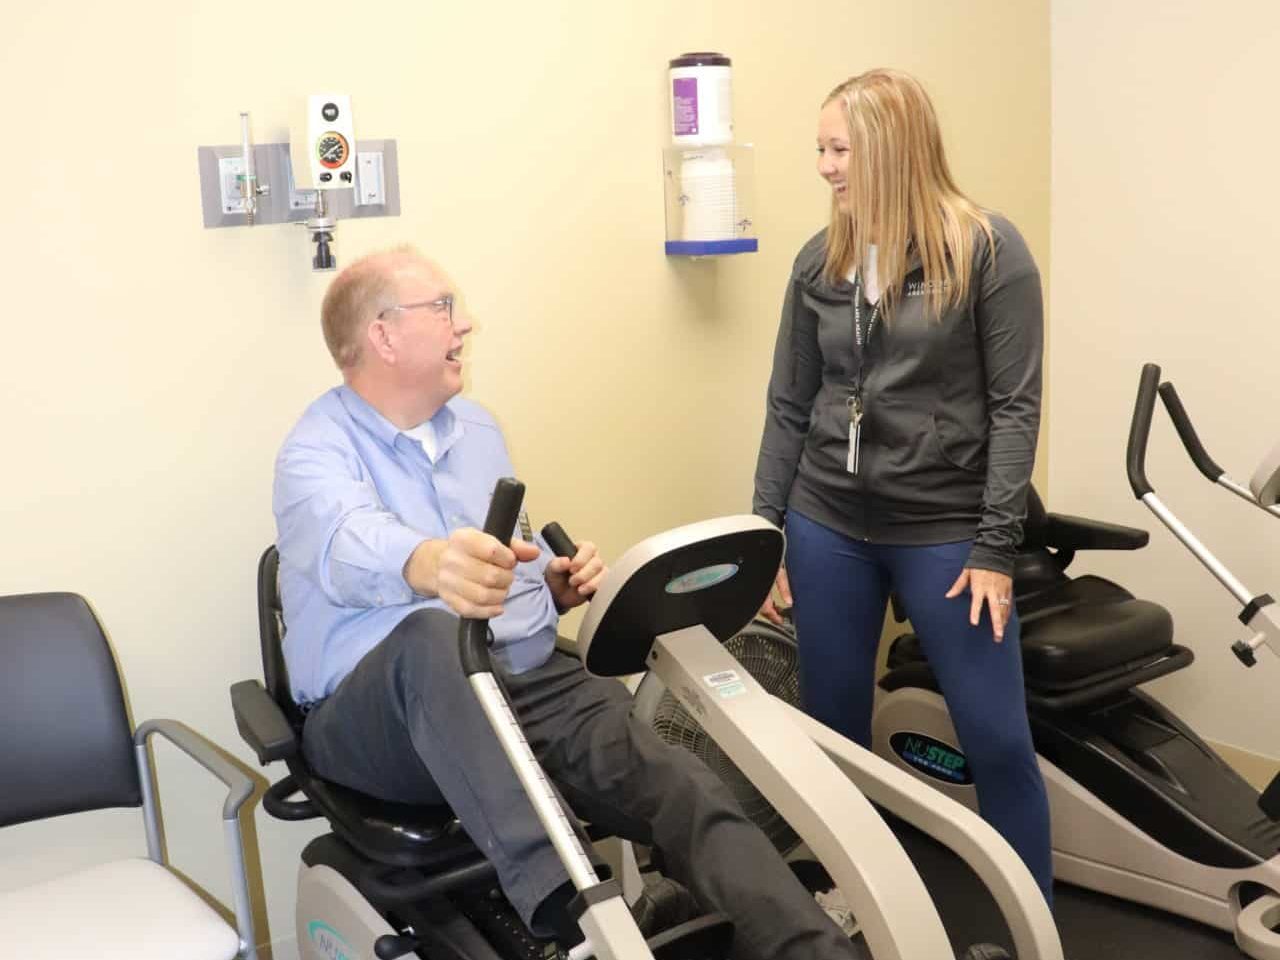 Pictured: Lacy Krueger working with Dan on a NuStep machine during a workout in the Cardiac Rehabilitation room.